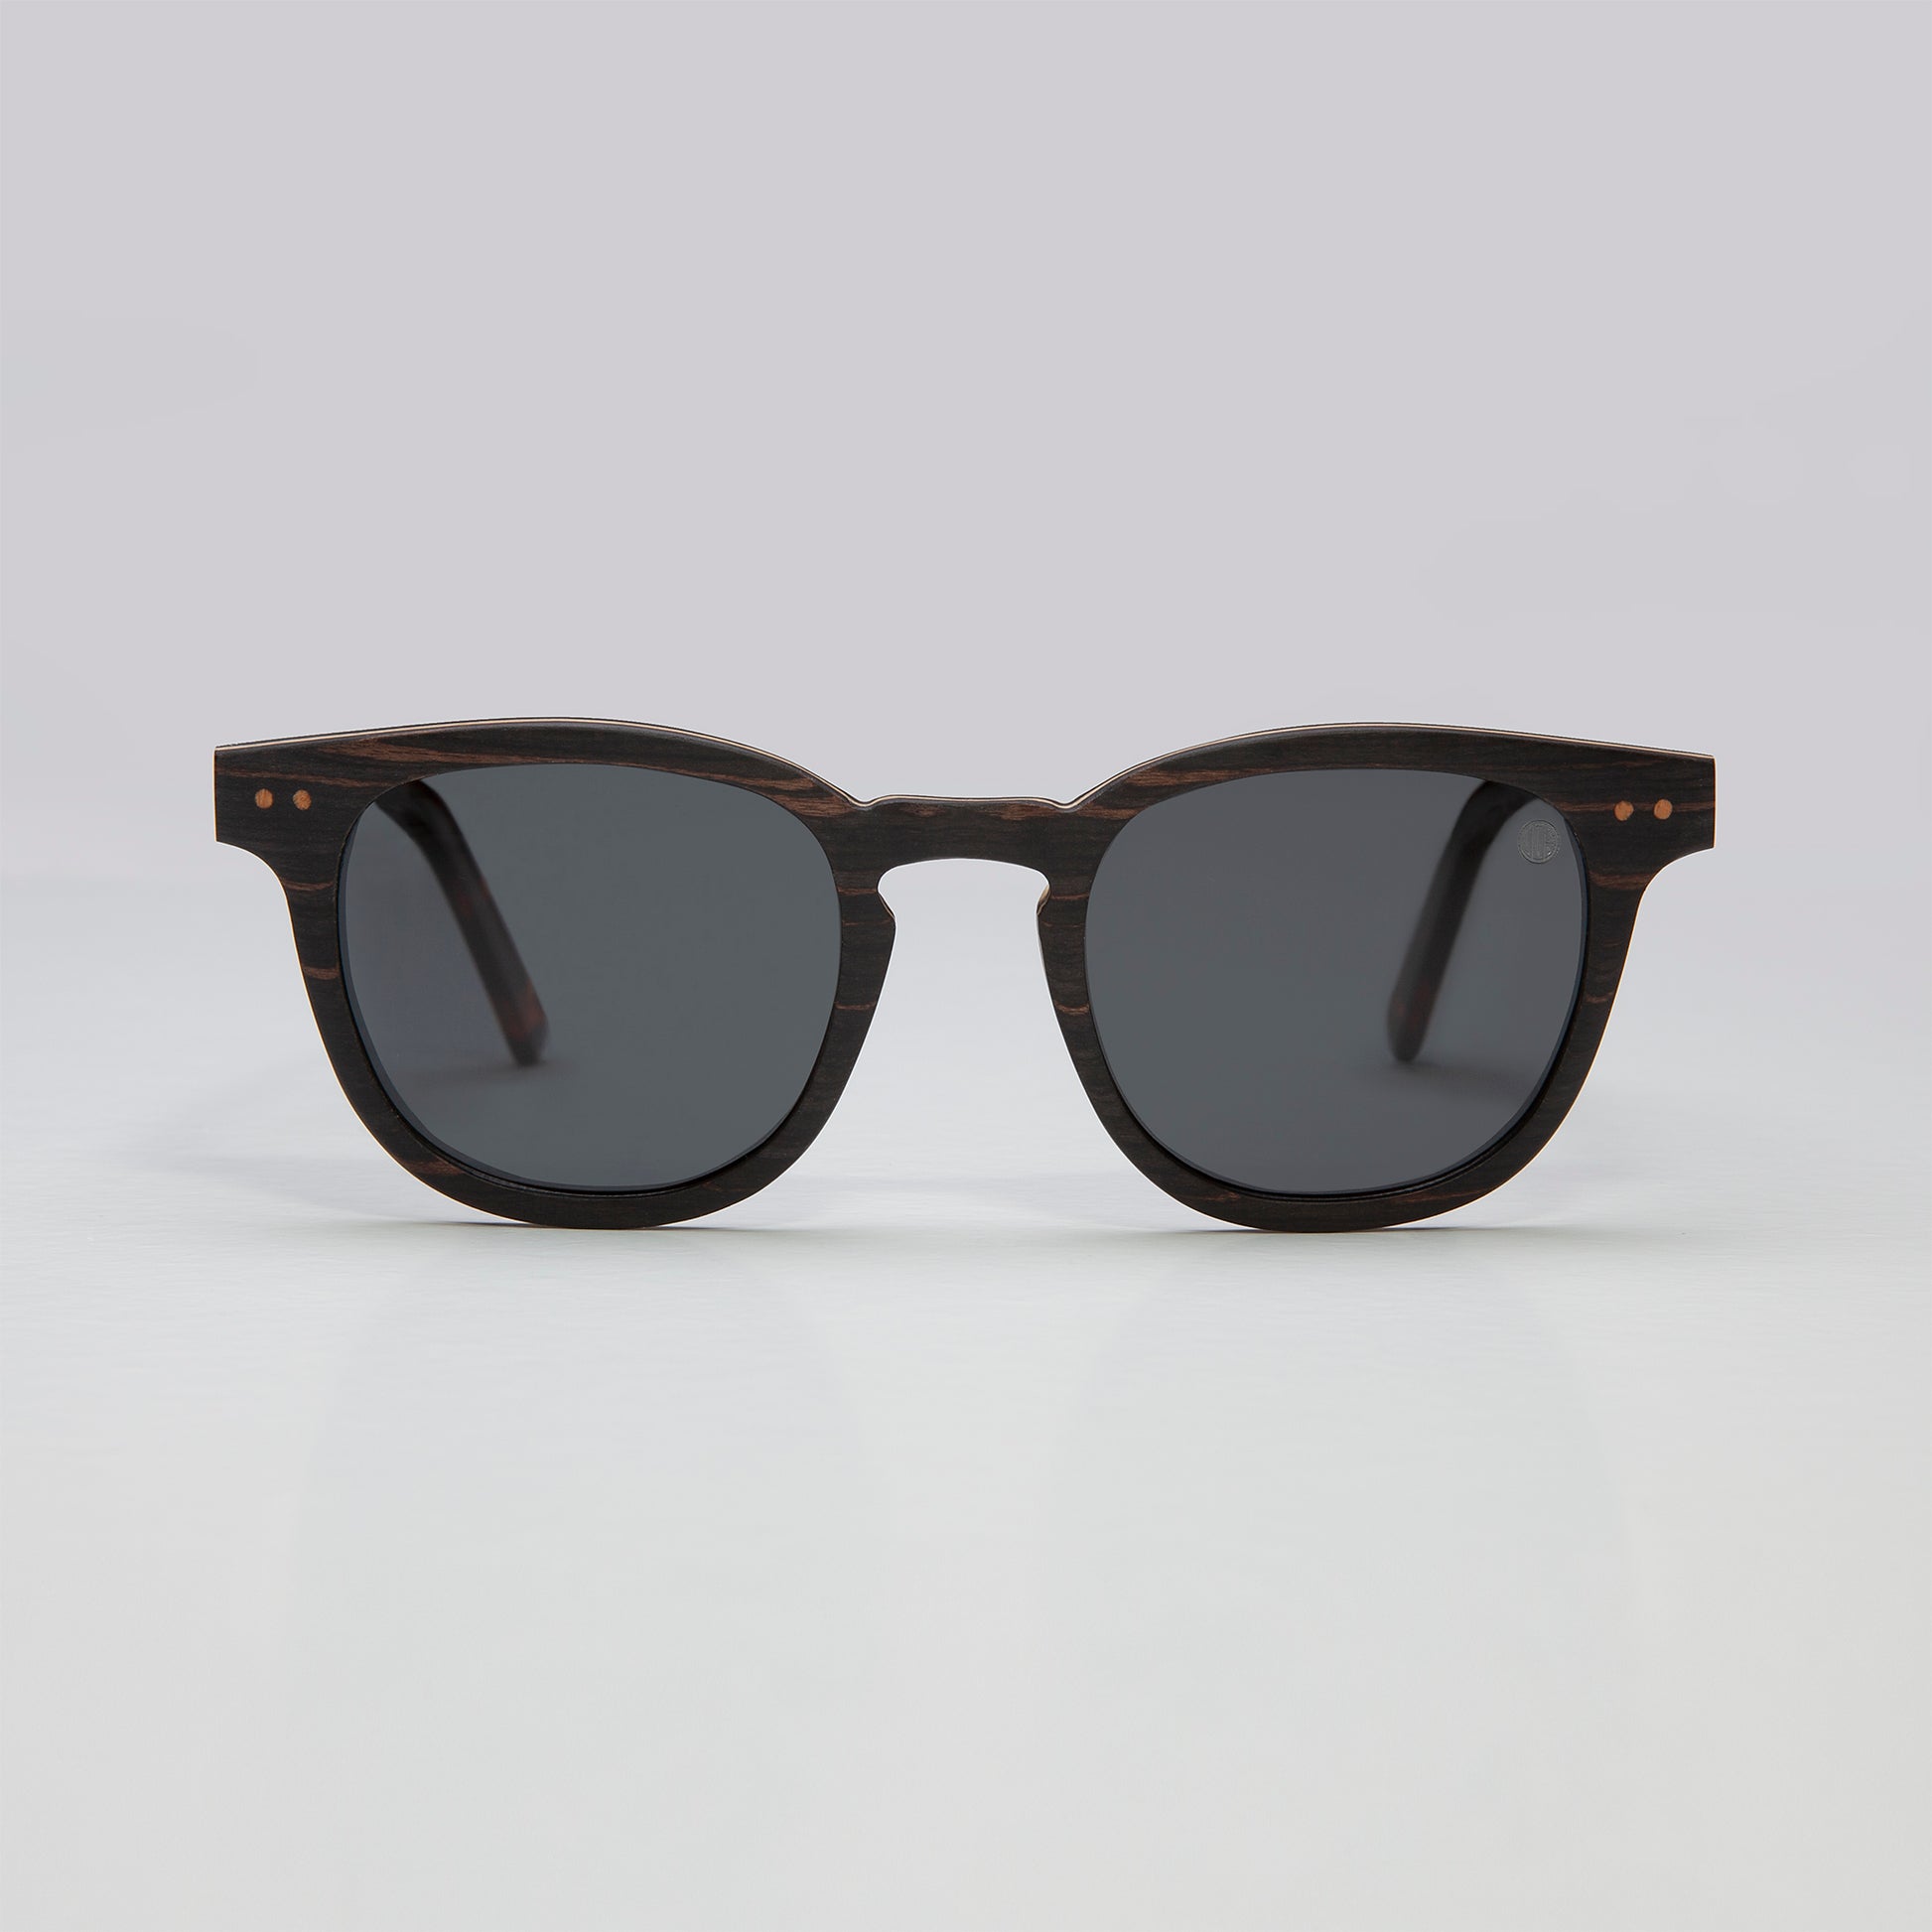 Eco Friendly SunglassesShaka BlackThe SHAKA sunglasses are the ultimate post surf pair of shades. With stylish frames made with black sandle wood off cuts, it provides a lightweight and beautiful desShaka Black